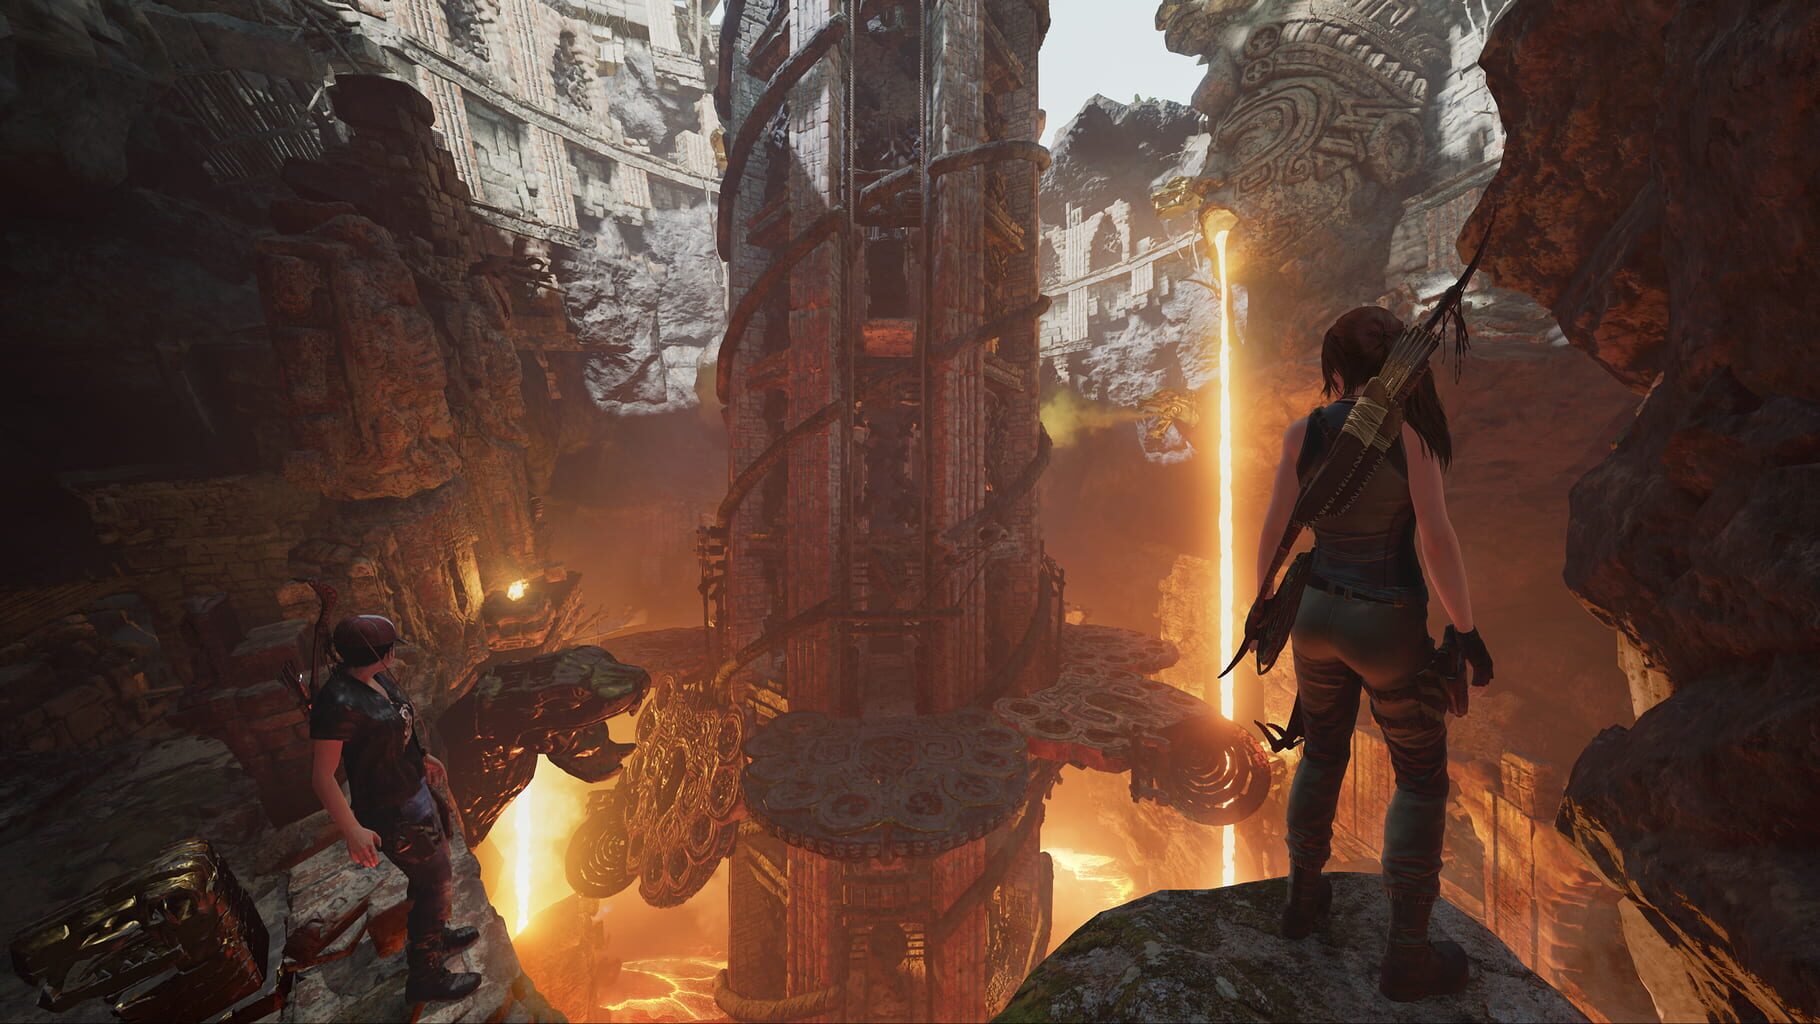 Shadow of the Tomb Raider: Definitive Edition Image